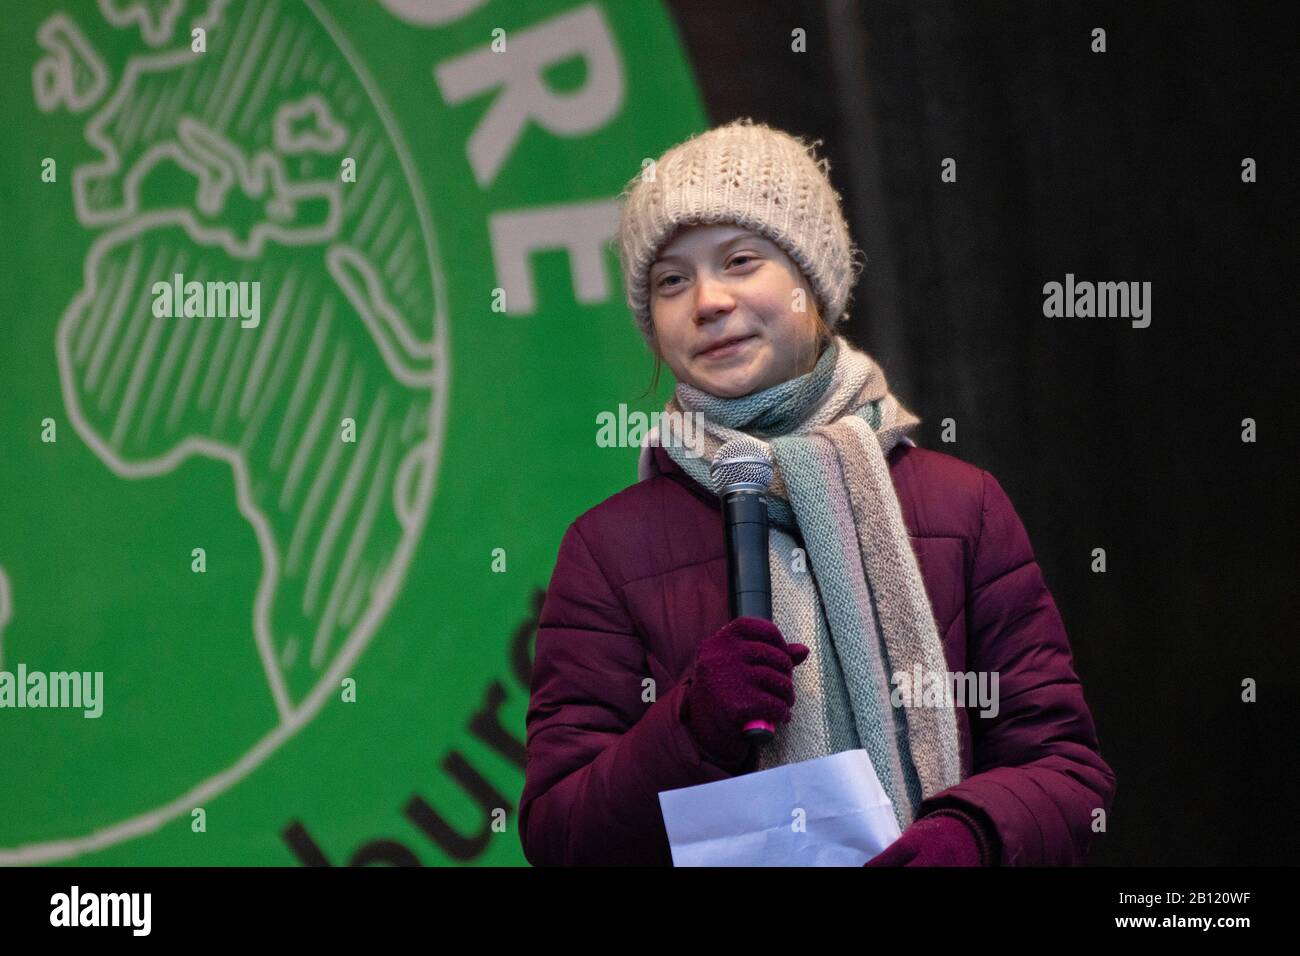 Greta Thunberg delivering a speech at the Fridays For Future demonstration in Hamburg, Germany, on February, 21, 2020 Stock Photo